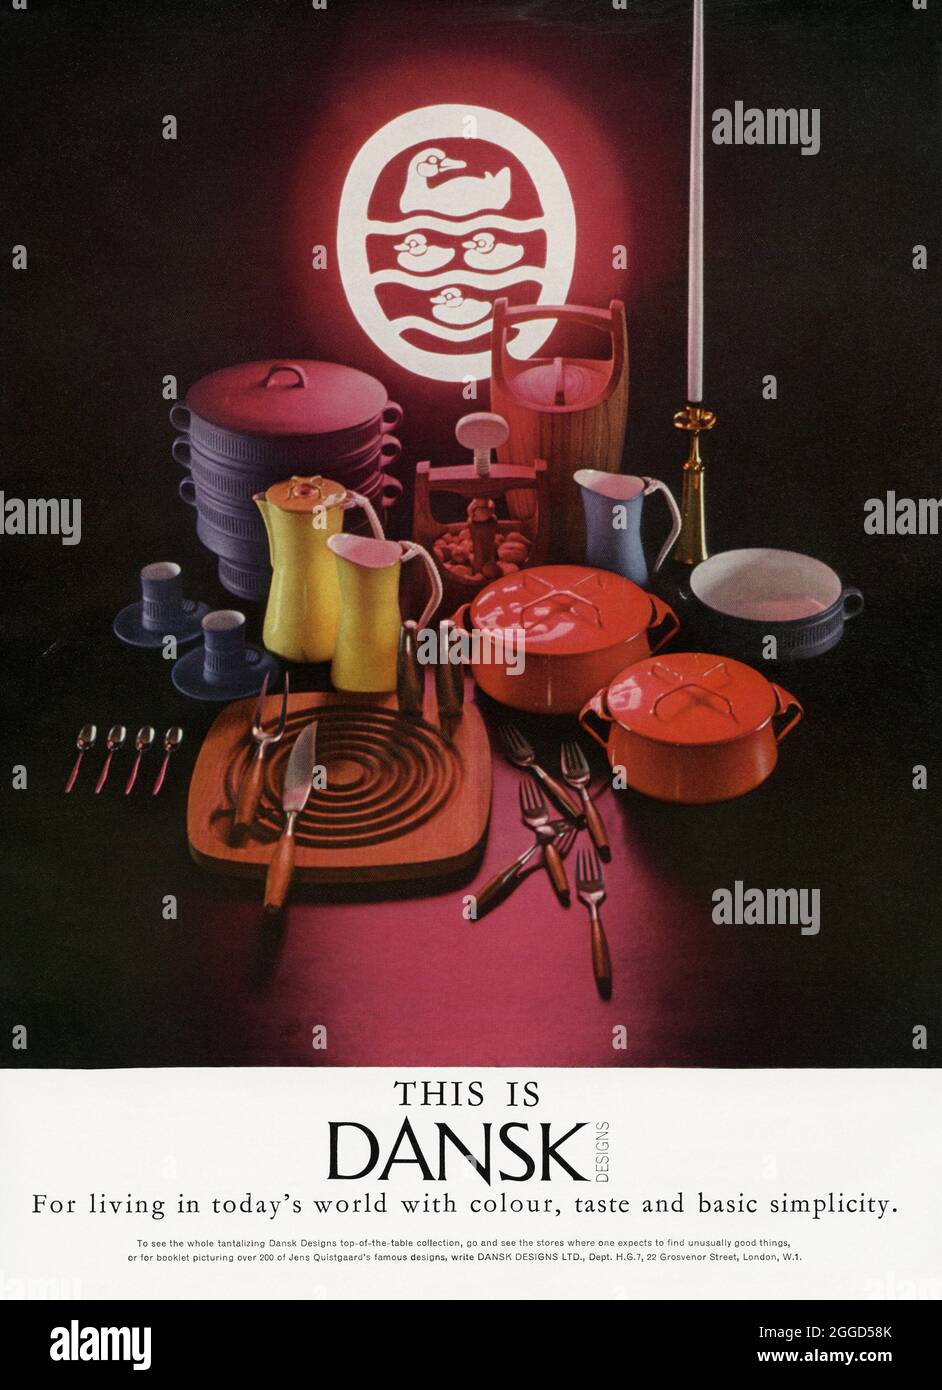 A 1960s advert for stylish, Danish tablewear and cutlery made by Dansk Designs. The advert appeared in a magazine published in the UK in October 1962. The photograph shows the range of products produced – from stainless steel cutlery, wooden kitchenware, ceramic coffee sets to enamelled cast-iron cookware. Dansk was founded in 1954 by principal designer Jens Quistgaard. Together with Ted Nierenberg, he formed Dansk Designs. By 1956, the now-famous Fjord Flatware line was being sold in American stores – vintage 1960s graphics. Stock Photo